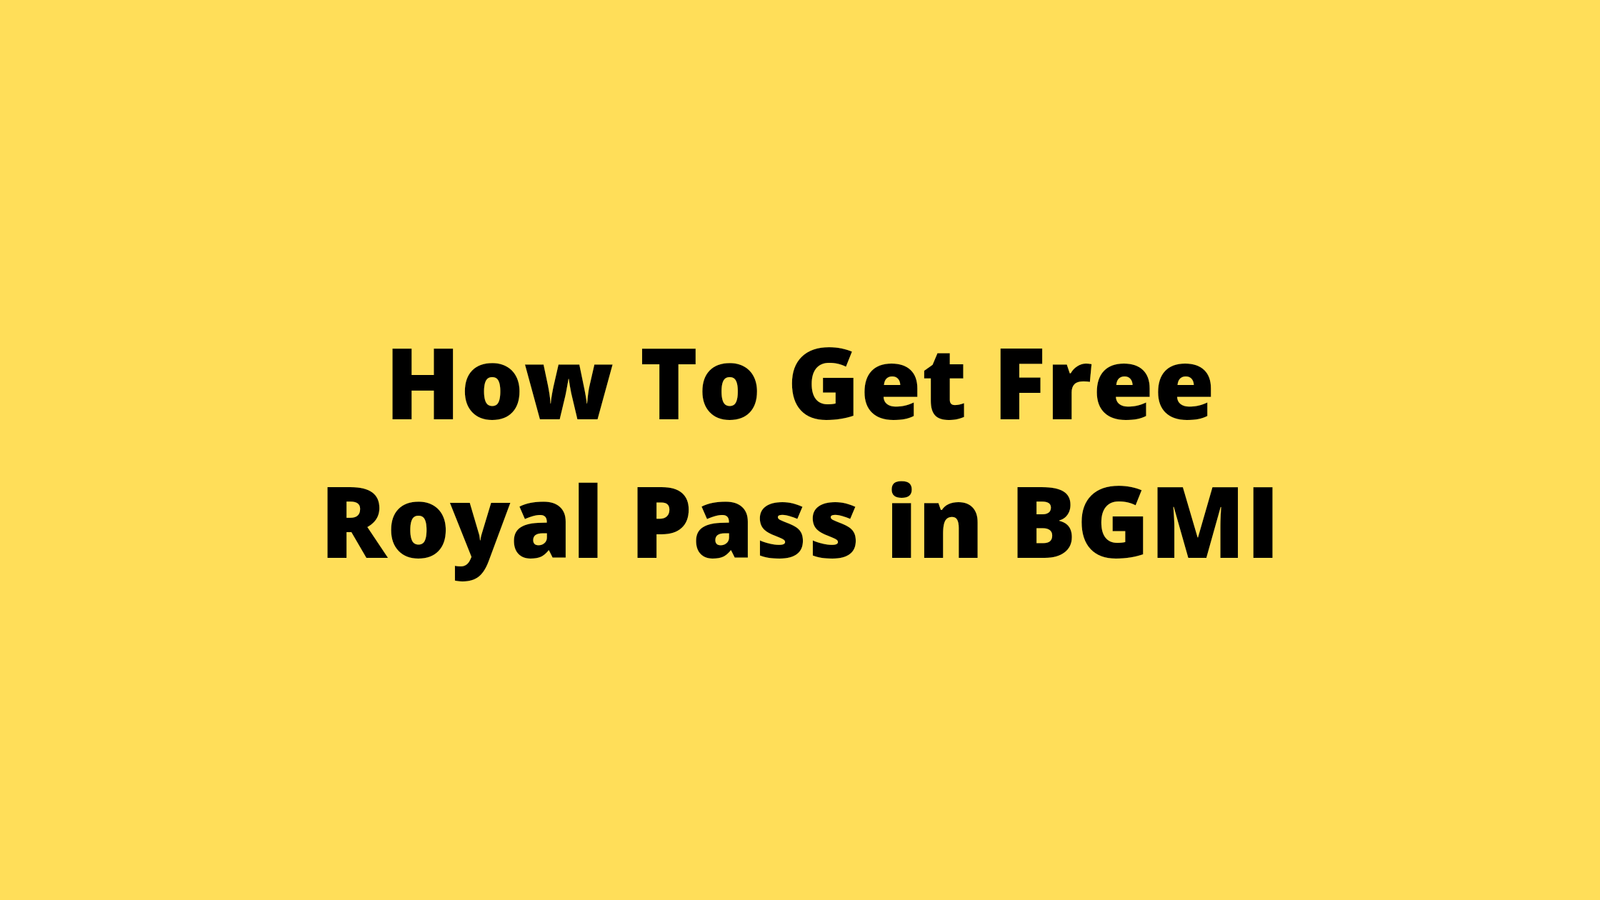 this image has a text says how to get free royal pass in bgmi